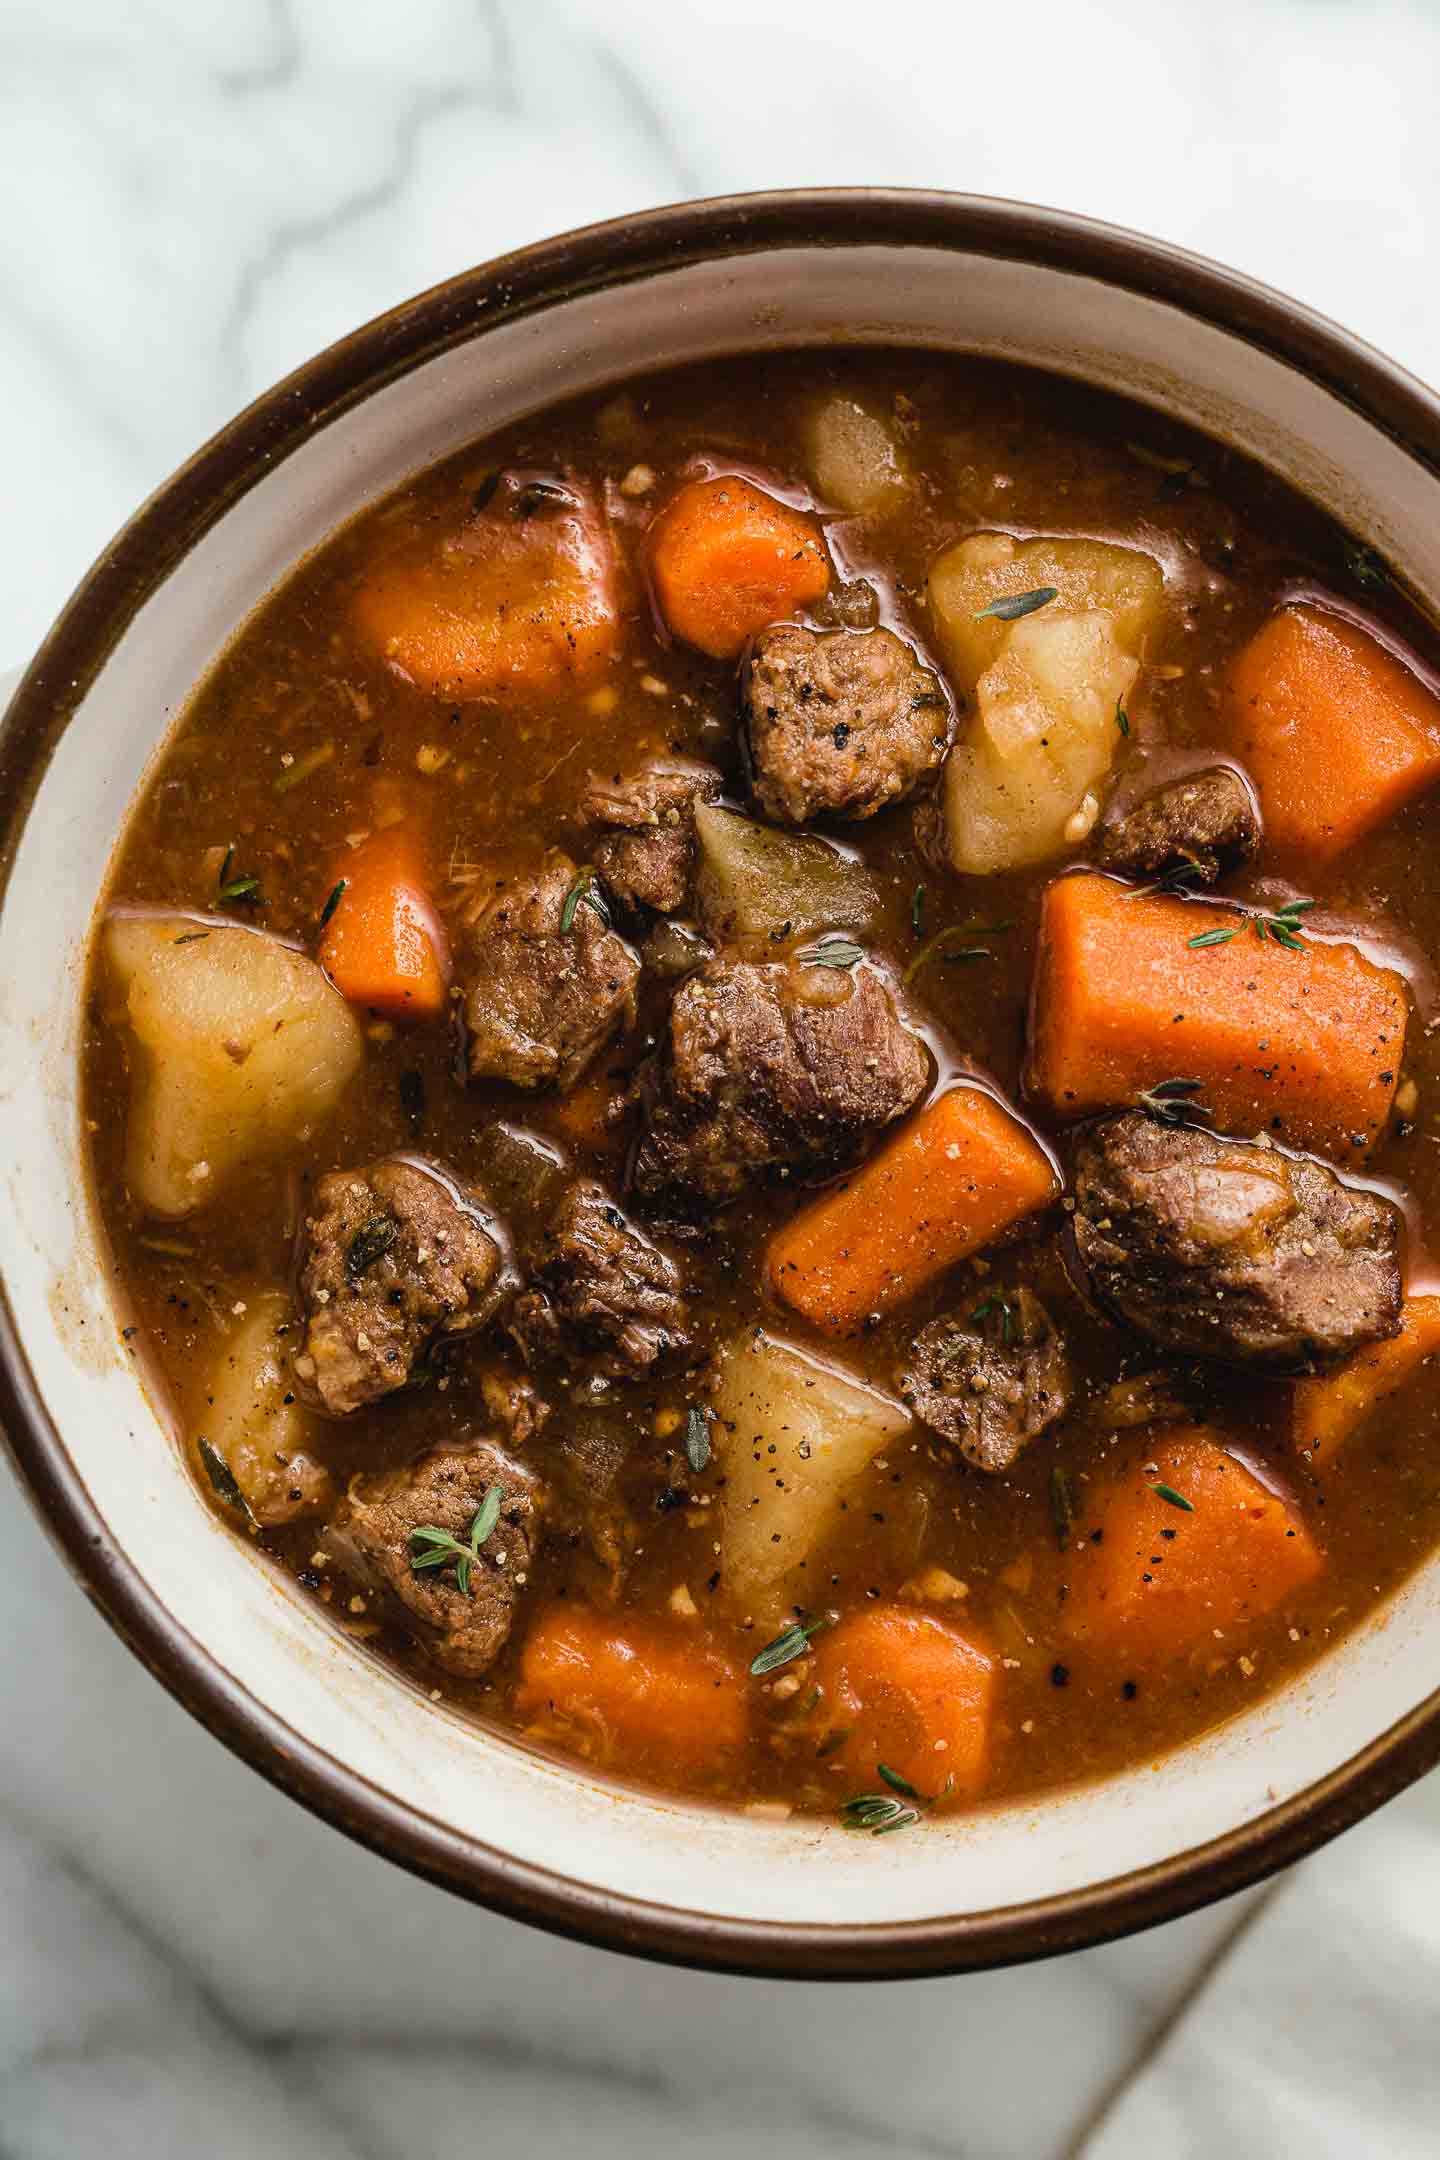 Instant Pot Recipe For Beef Stew
 Instant Pot Beef Stew Step by Step Guide